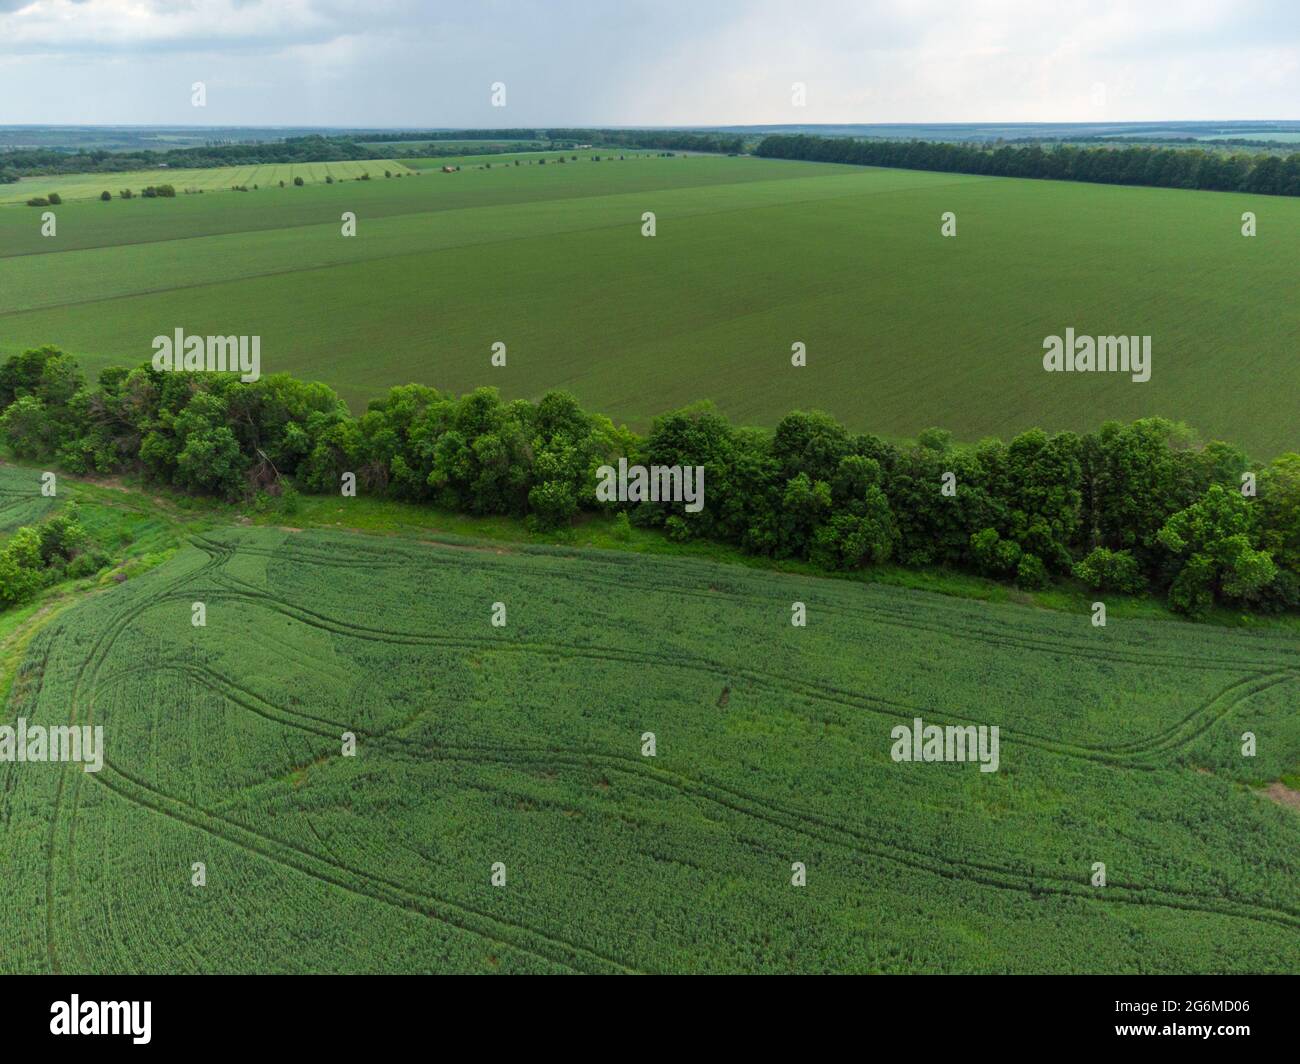 Aerial view on green fields with young wheat harvest. Fly above scenic summer landscape in rural agriculture area. Drone view Stock Photo